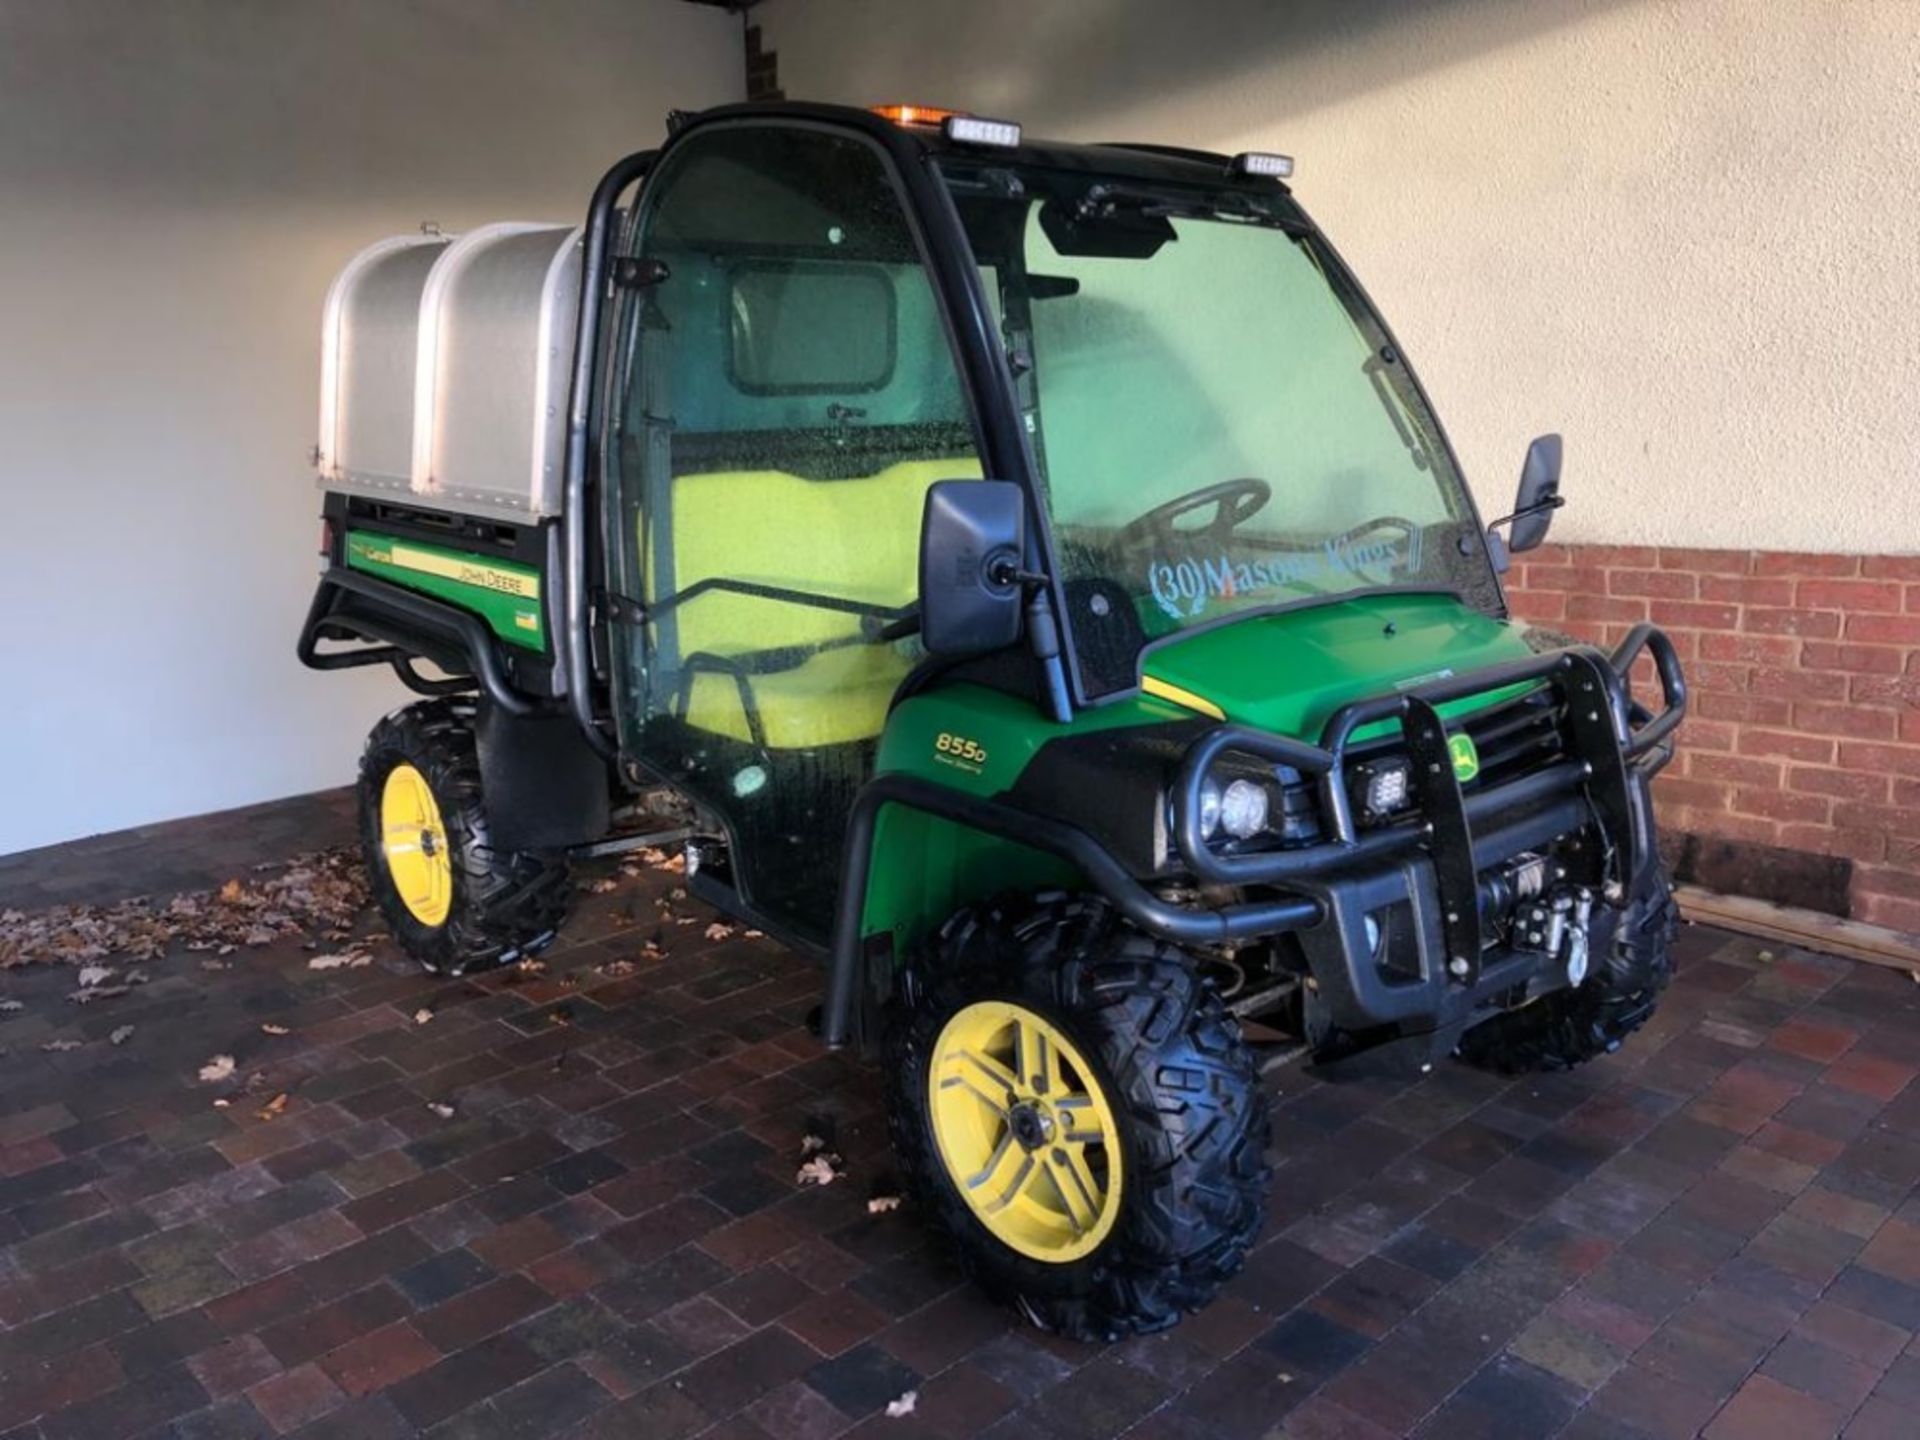 JOHN DEERE 855D GATOR 1263HRS WA14BWL 1 OWNER FROM NEW ROAD LEGAL GLASS DOORS REAR CANOPY - Image 2 of 11